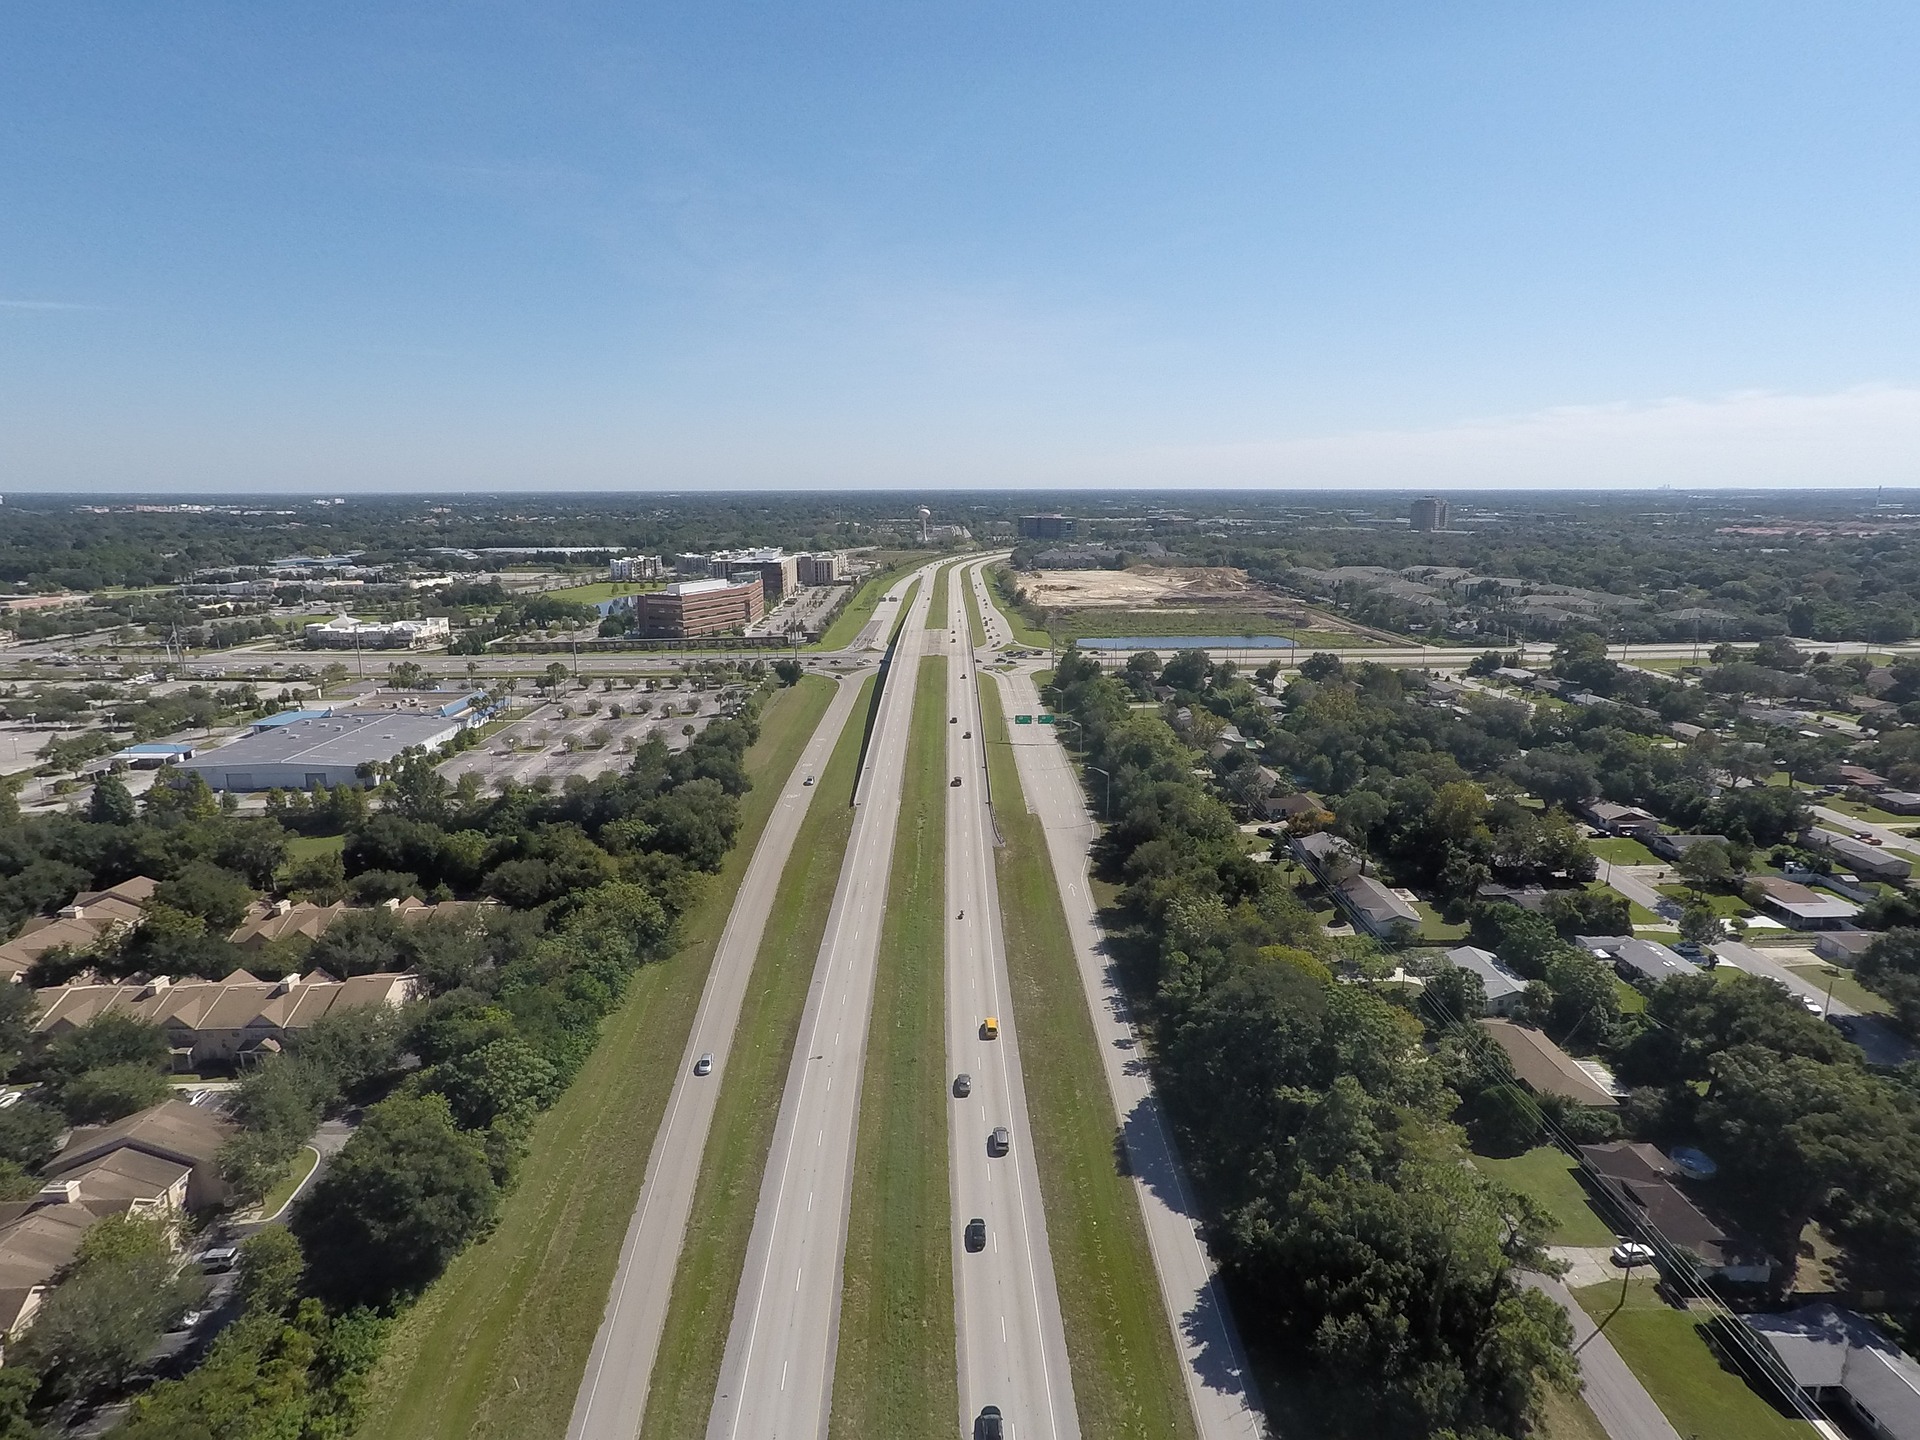 An aerial view of a Florida highway.